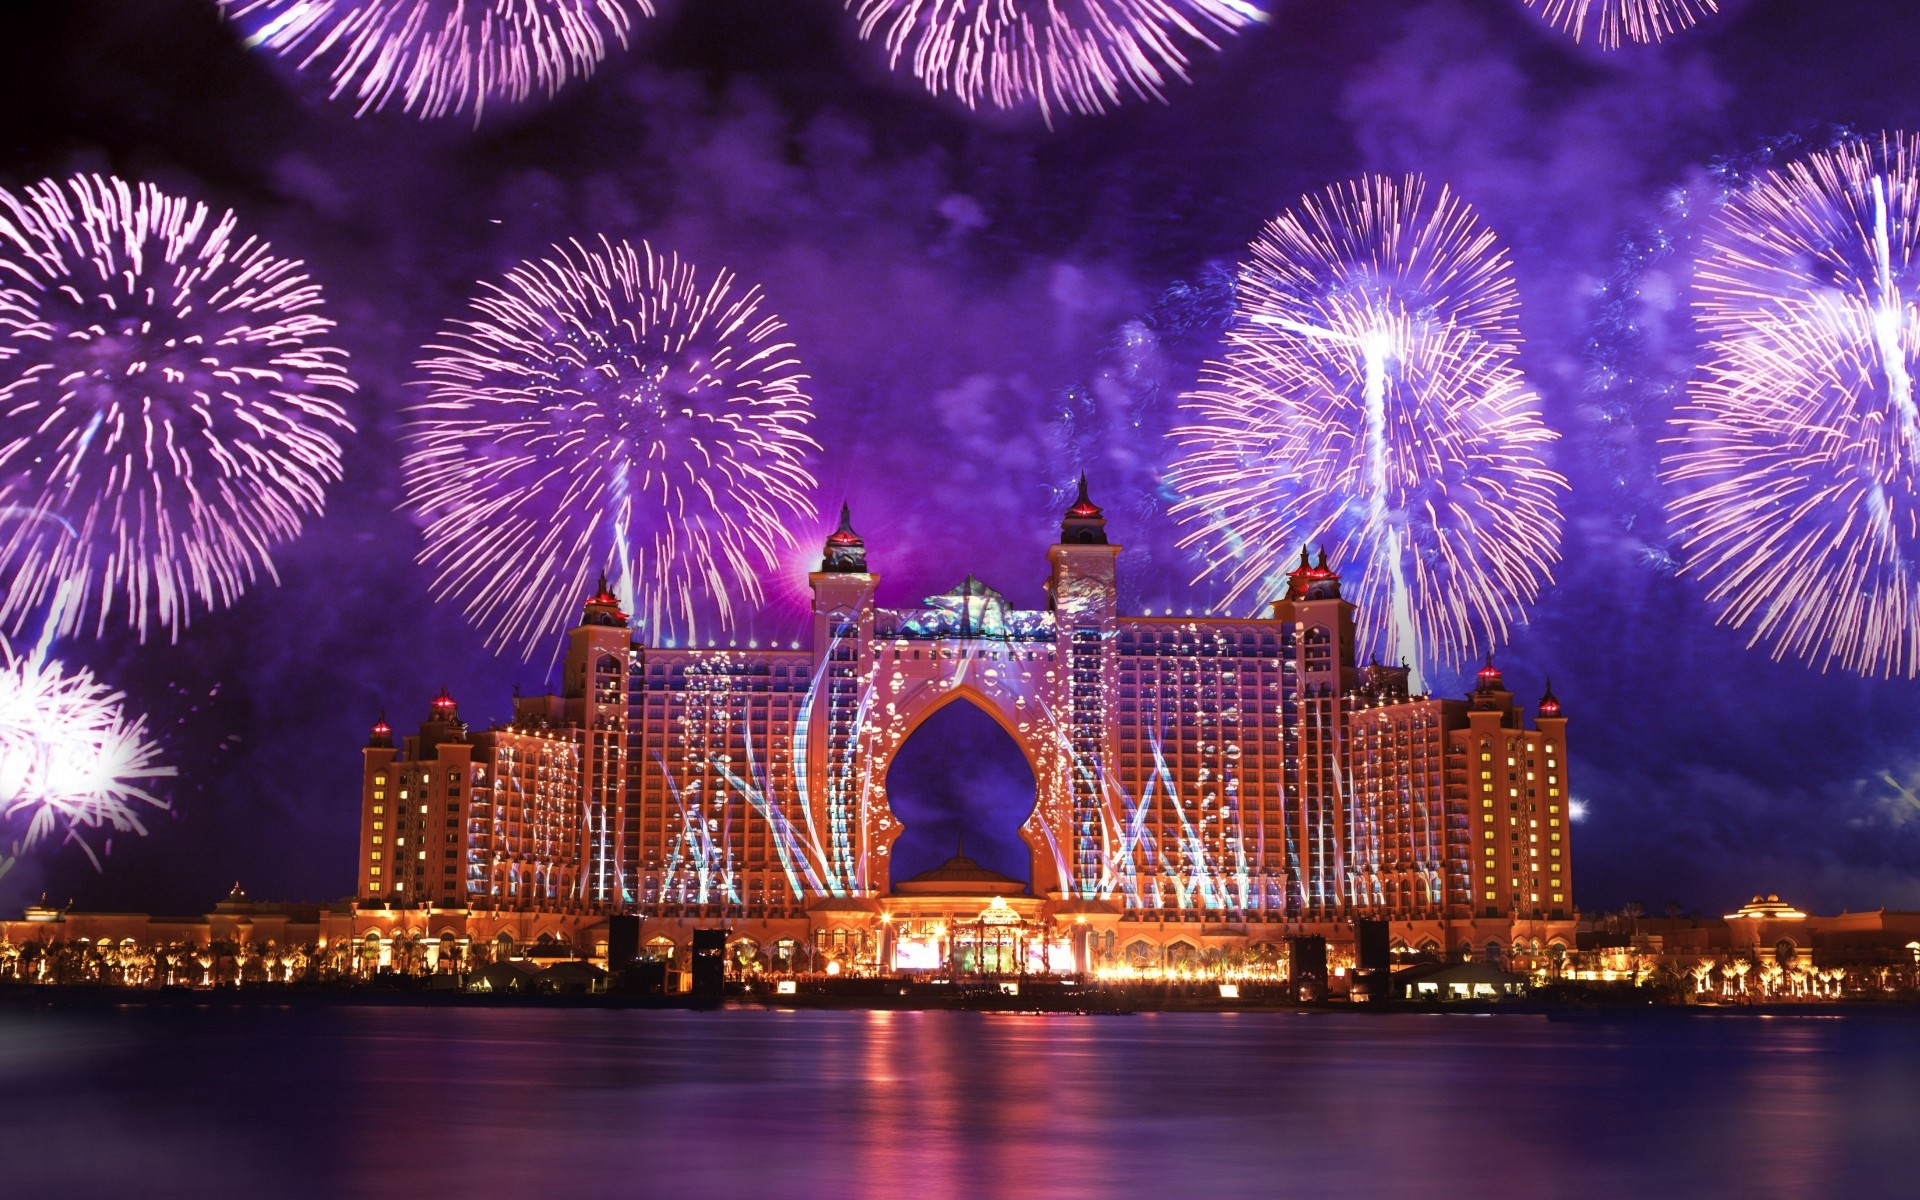 Fireworks On The Architectural Creation HD Desktop Wallpaper